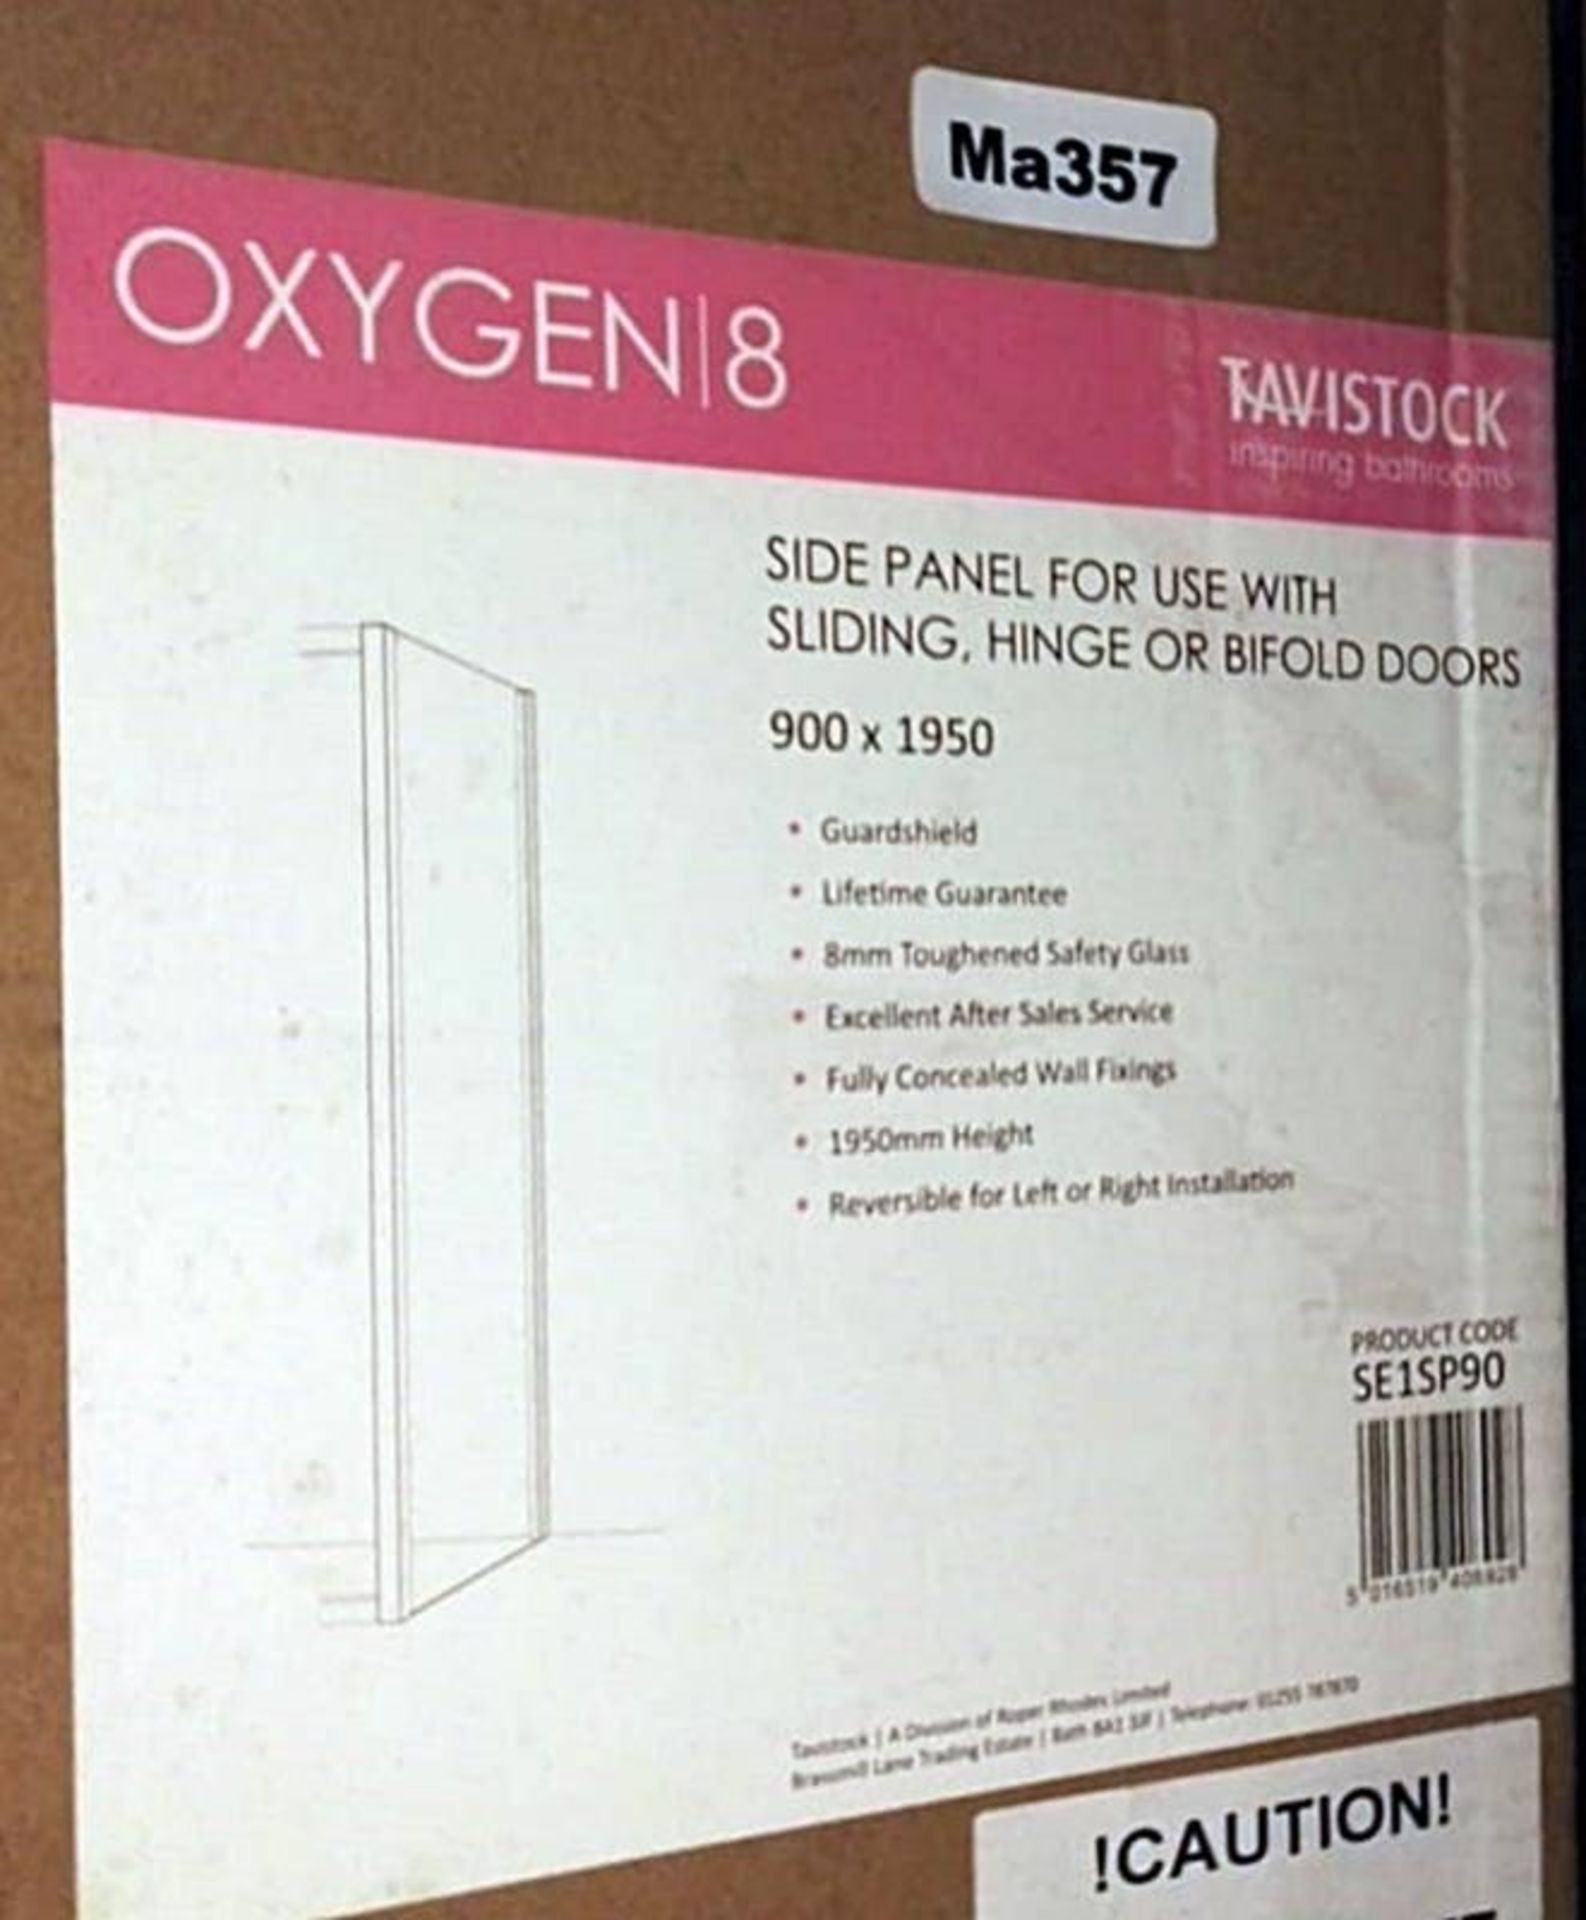 1 x Tavistock 'OXYGEN 8' Side Panel - Dimensions: 900 x 1950 - Ref: ma357A - New / Boxed Stock - CL0 - Image 2 of 2